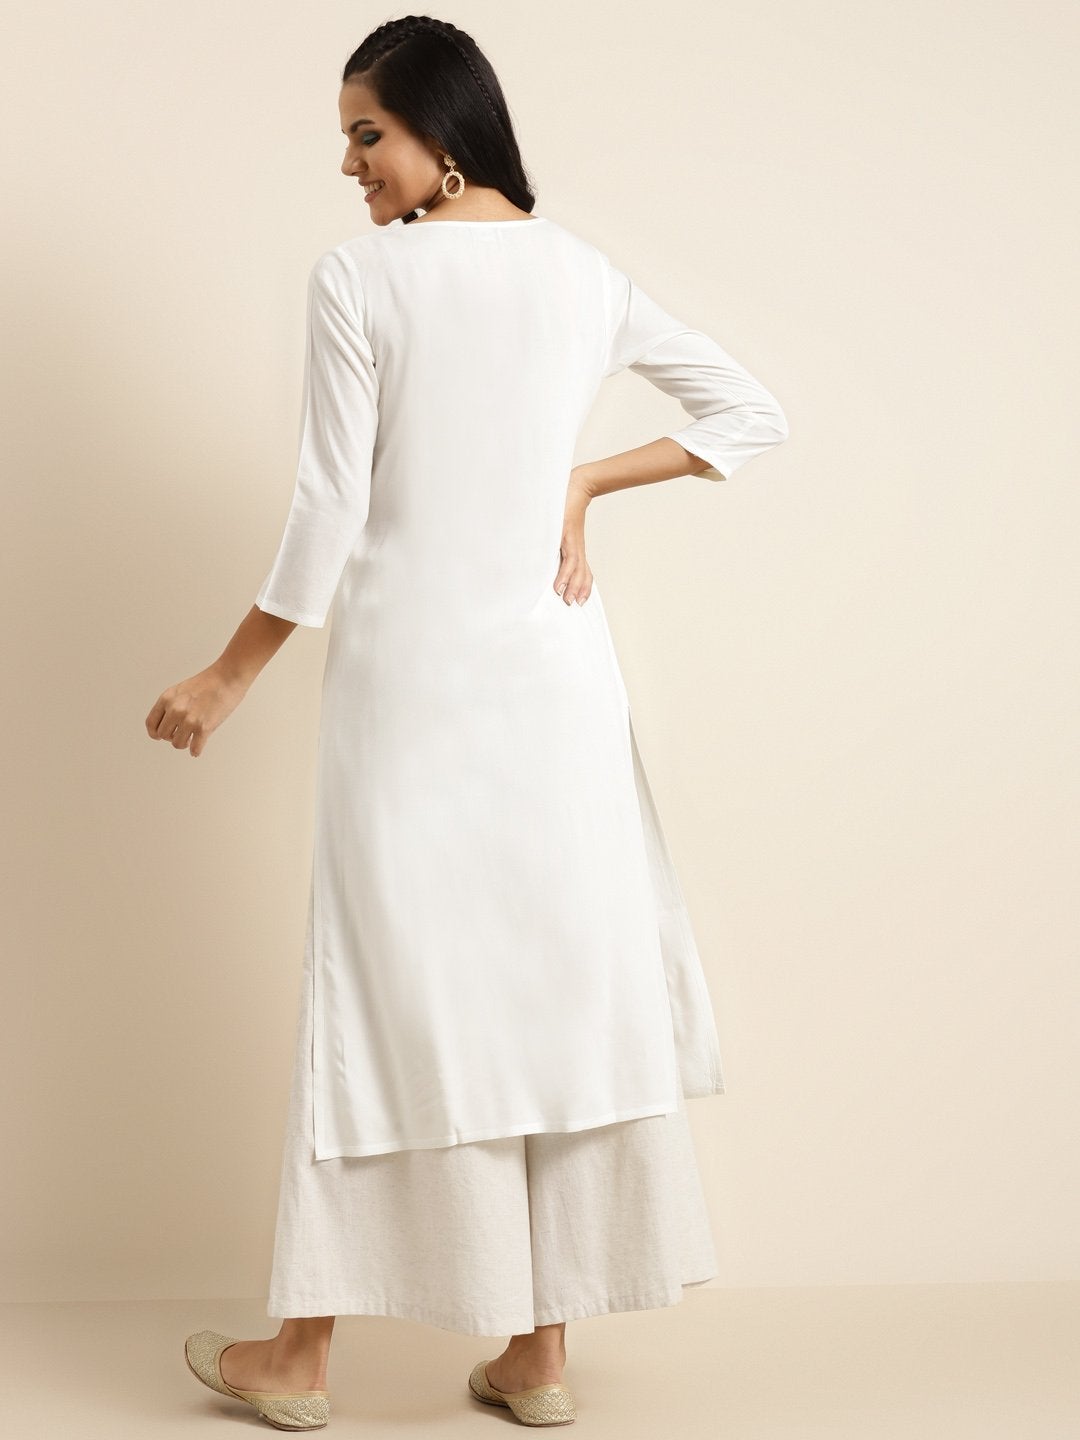 Women's Off White Floral Embroidery Straight Kurta - SHAE